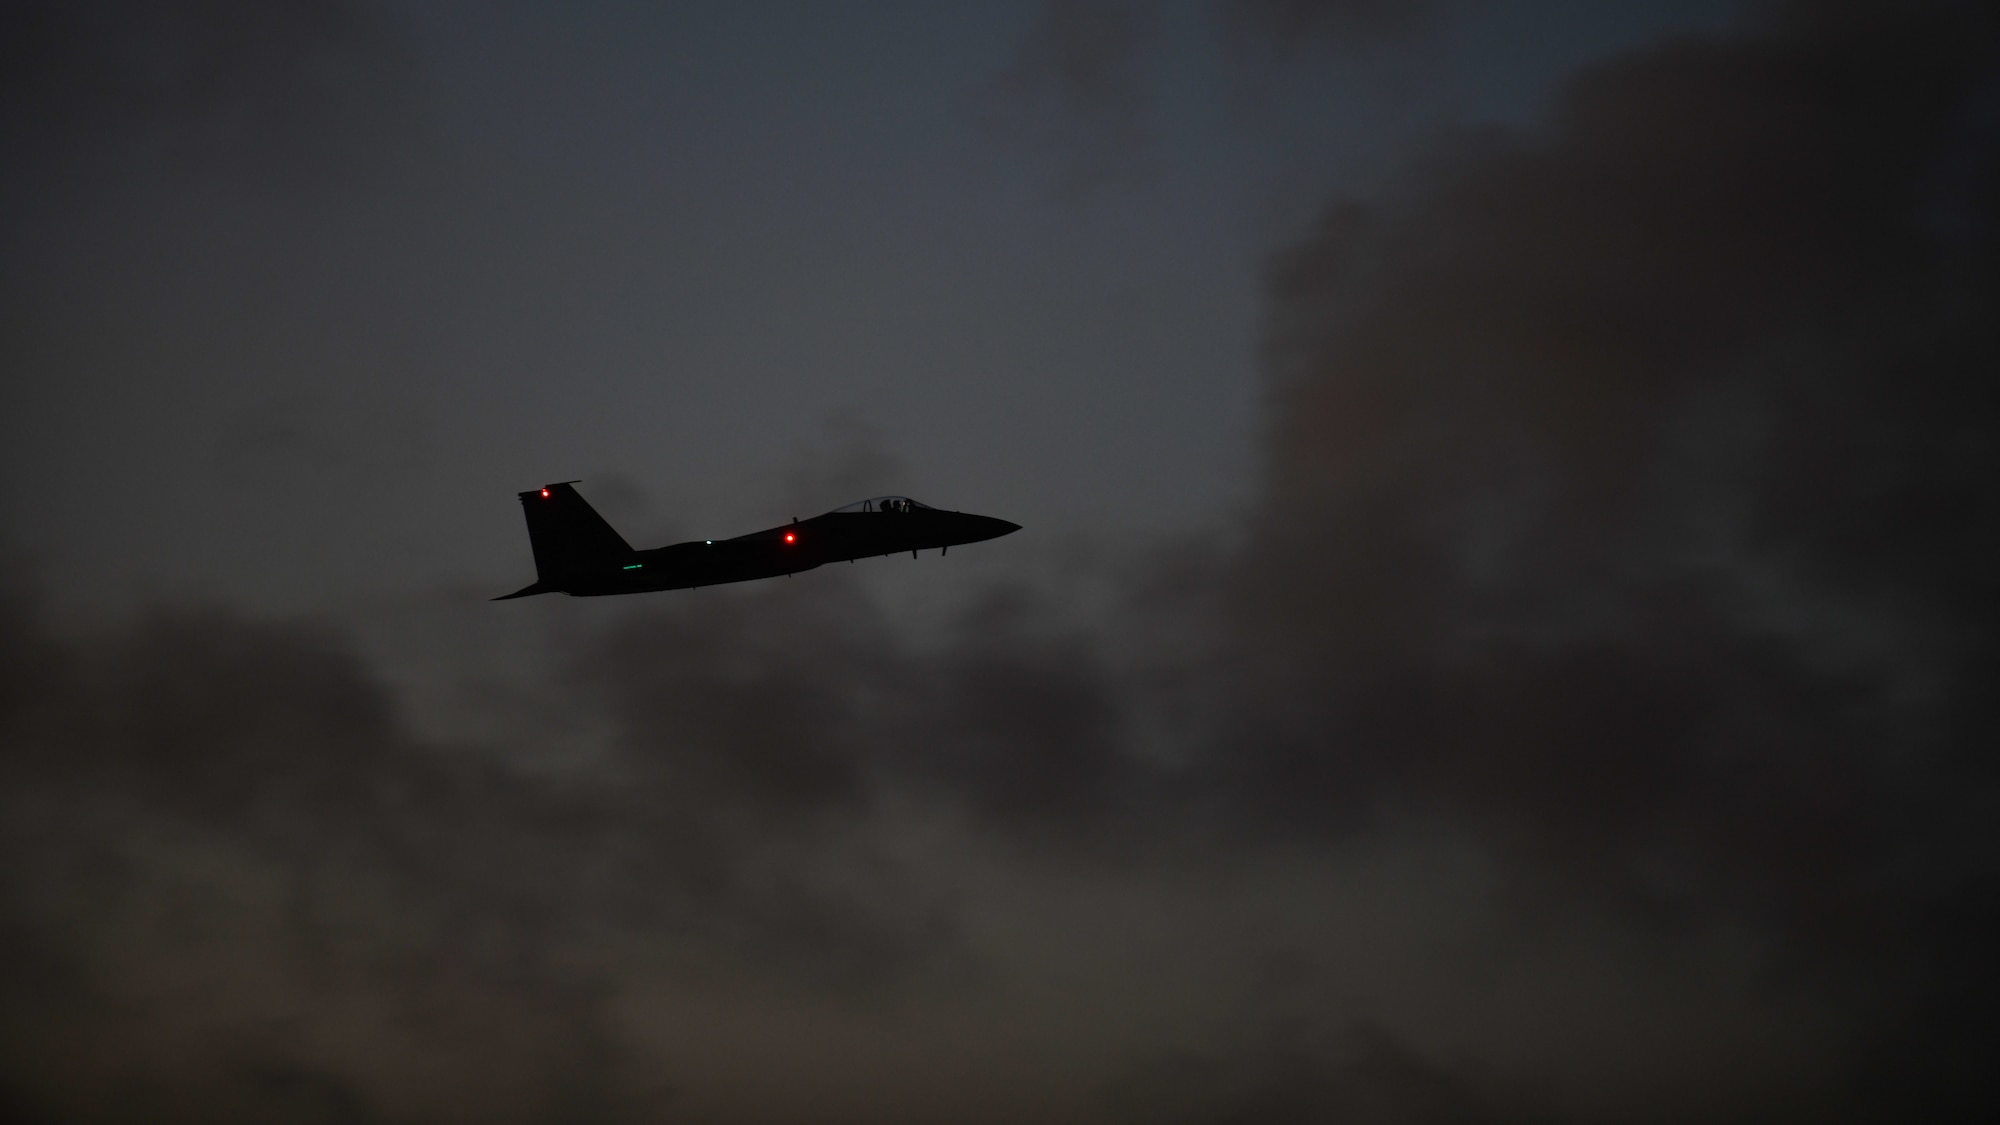 An F-15C Eagle assigned to the 44th Fighter Squadron flies overhead at Kadena Air Base, Japan, April 12, 2022. Night flying operations enable aircrew, maintainers and support personnel to hone their skills and ensure Team Kadena maintains a ready force to support the Indo-Pacific region. (U.S. Air Force photo by Staff Sgt. Benjamin Raughton)